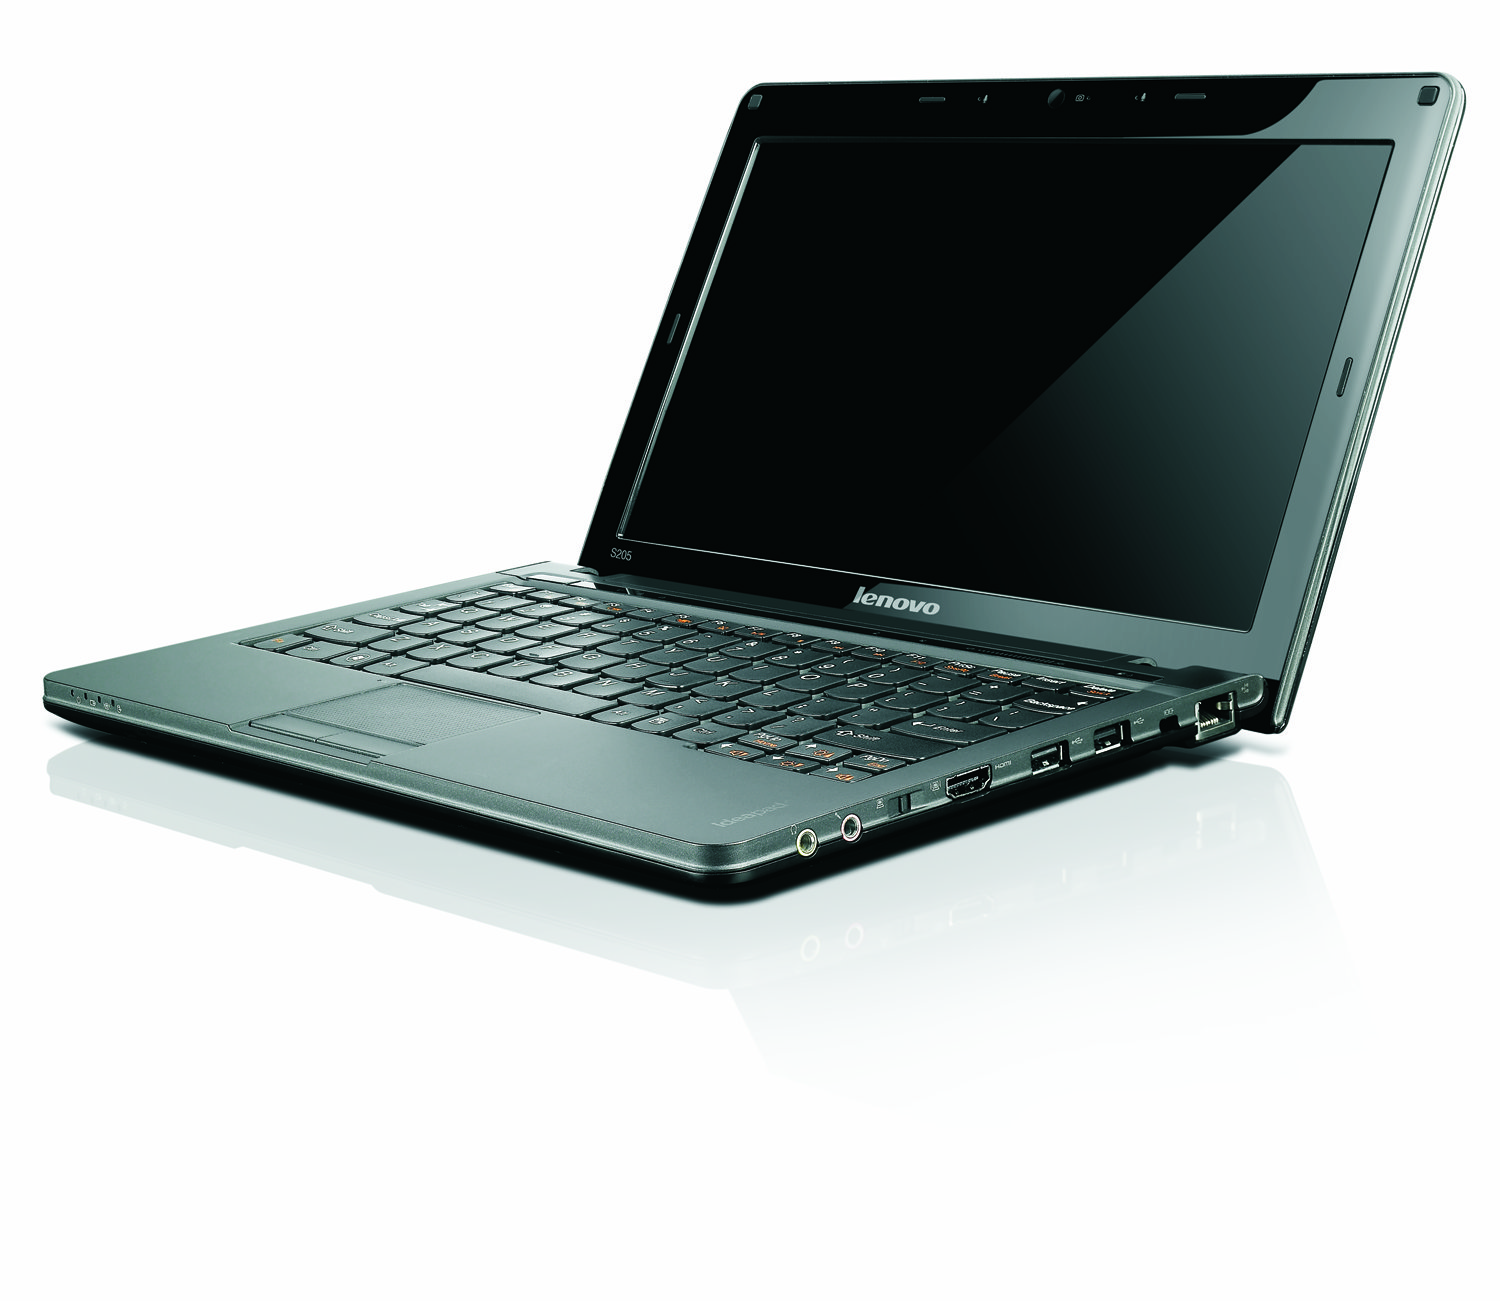  announcements Lenovo unveiled the AMD powered IdeaPad S205 mini-laptop, 